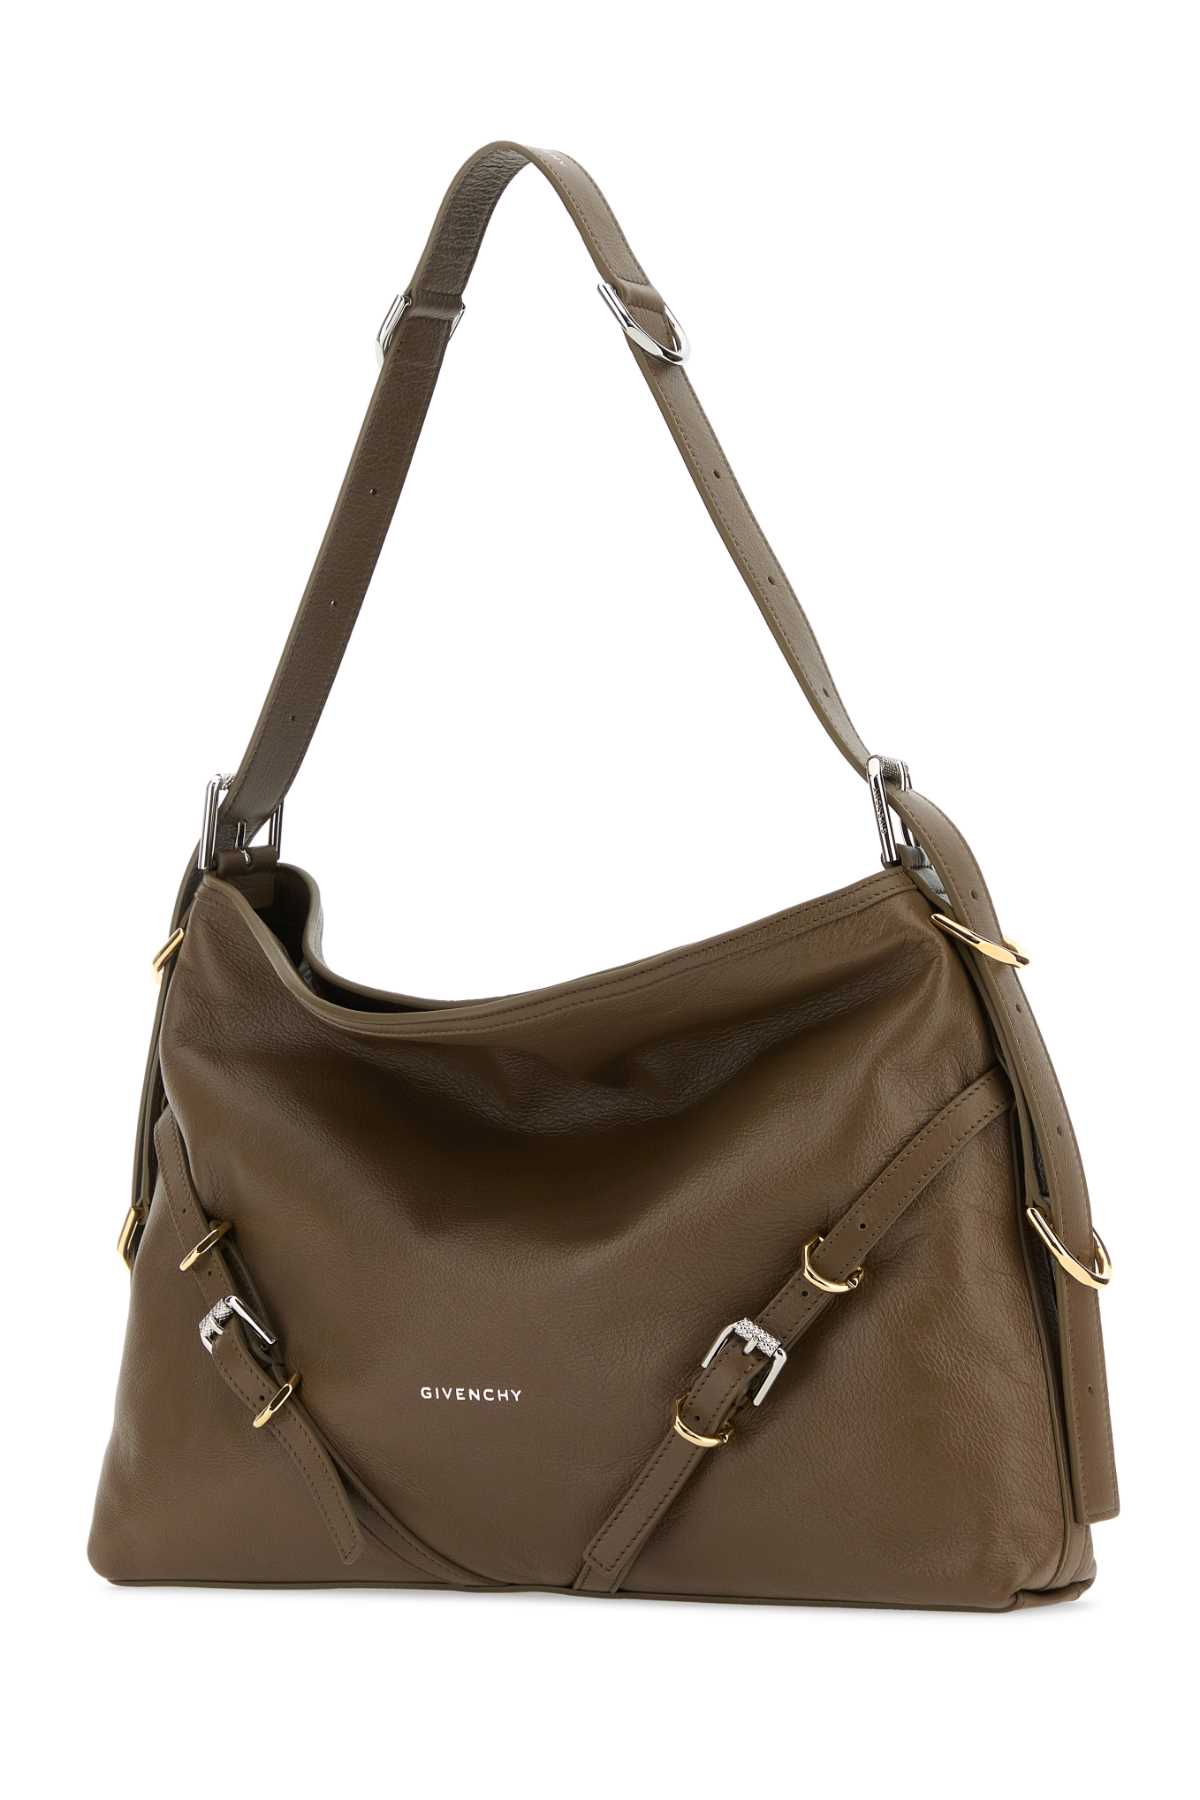 Givenchy Cappuccino Leather Medium Voyou Shoulder Bag In Taupe